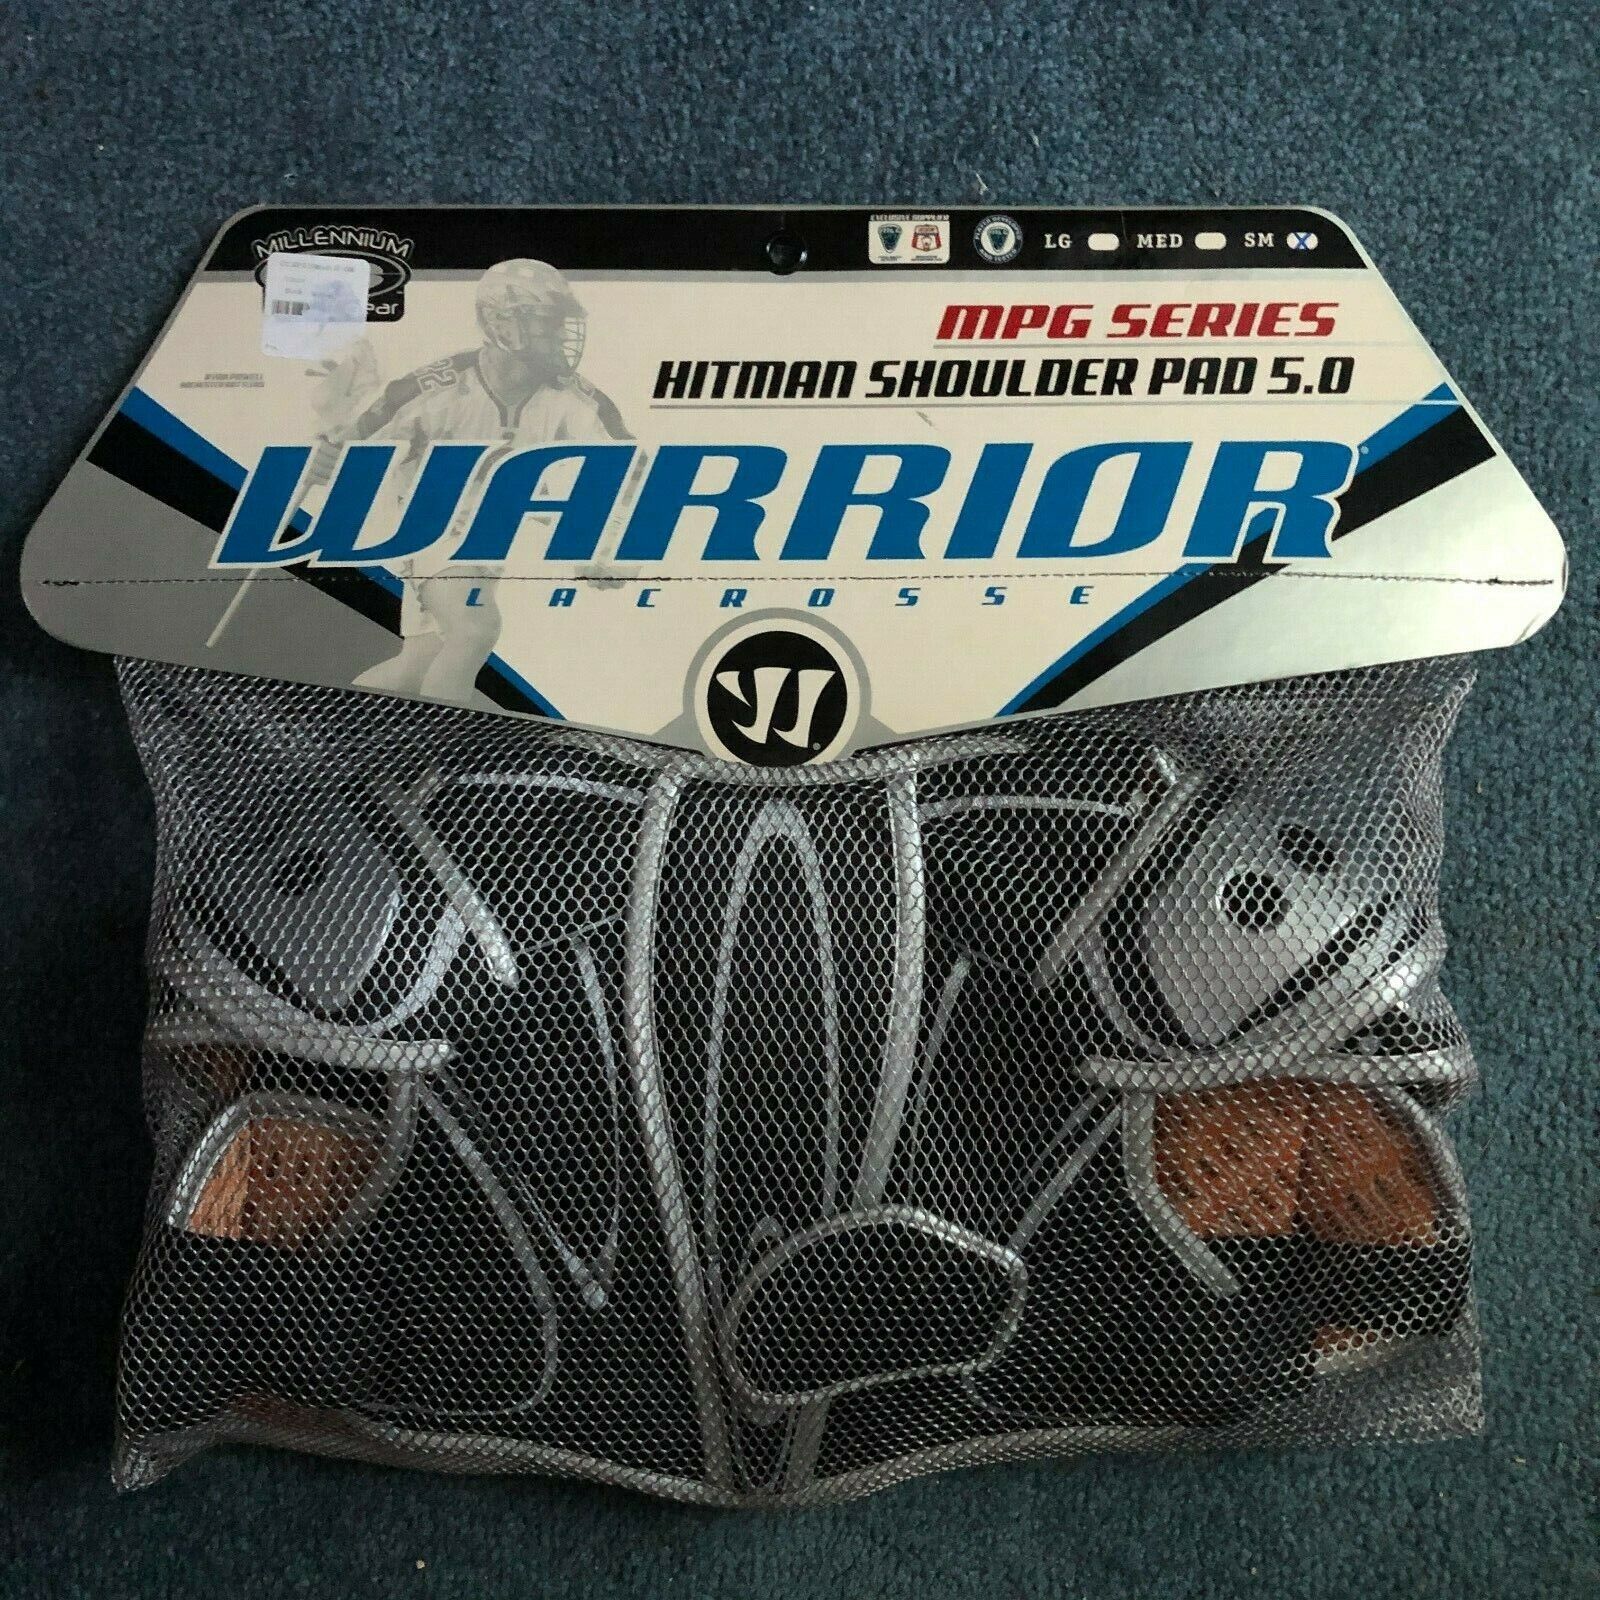 Warrior Lacrosse Mpg Black/silver Hitman 5.0 Shoulder Pads Size Youth S - New